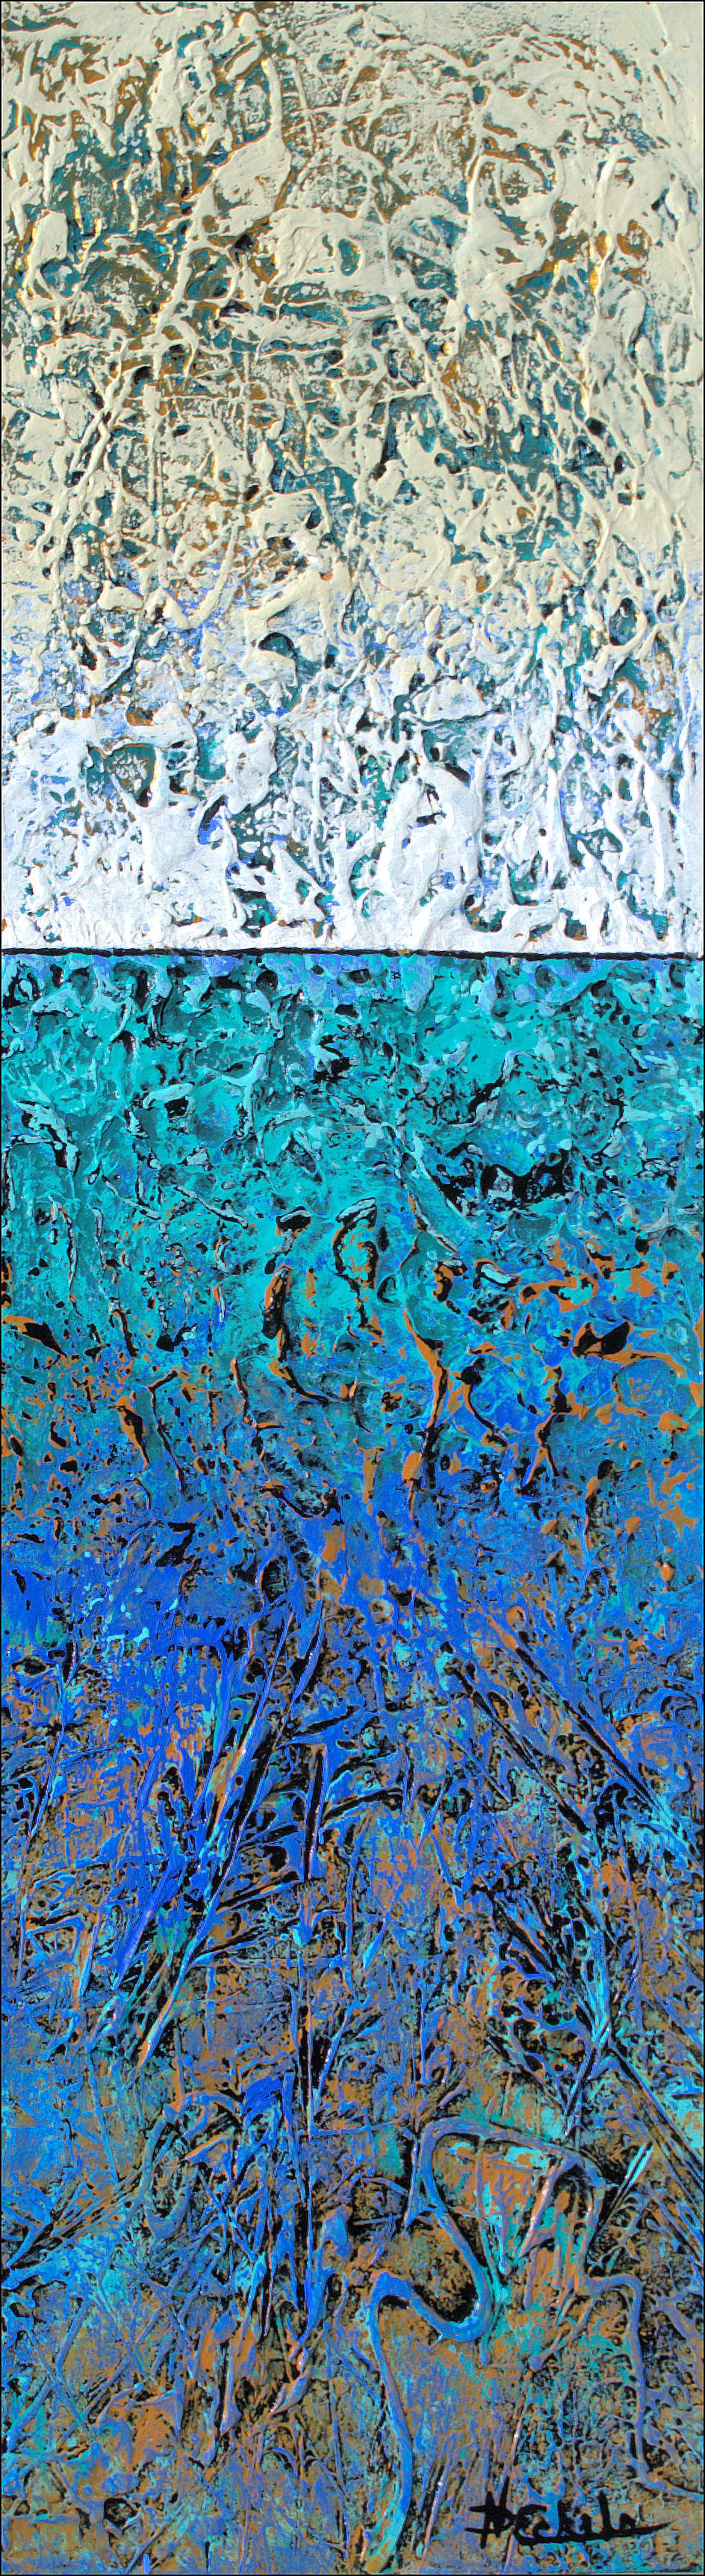 Nancy Eckels Abstract Painting - "Waters Edge" Mixed Media abstract with textural blues, lavender, and tan